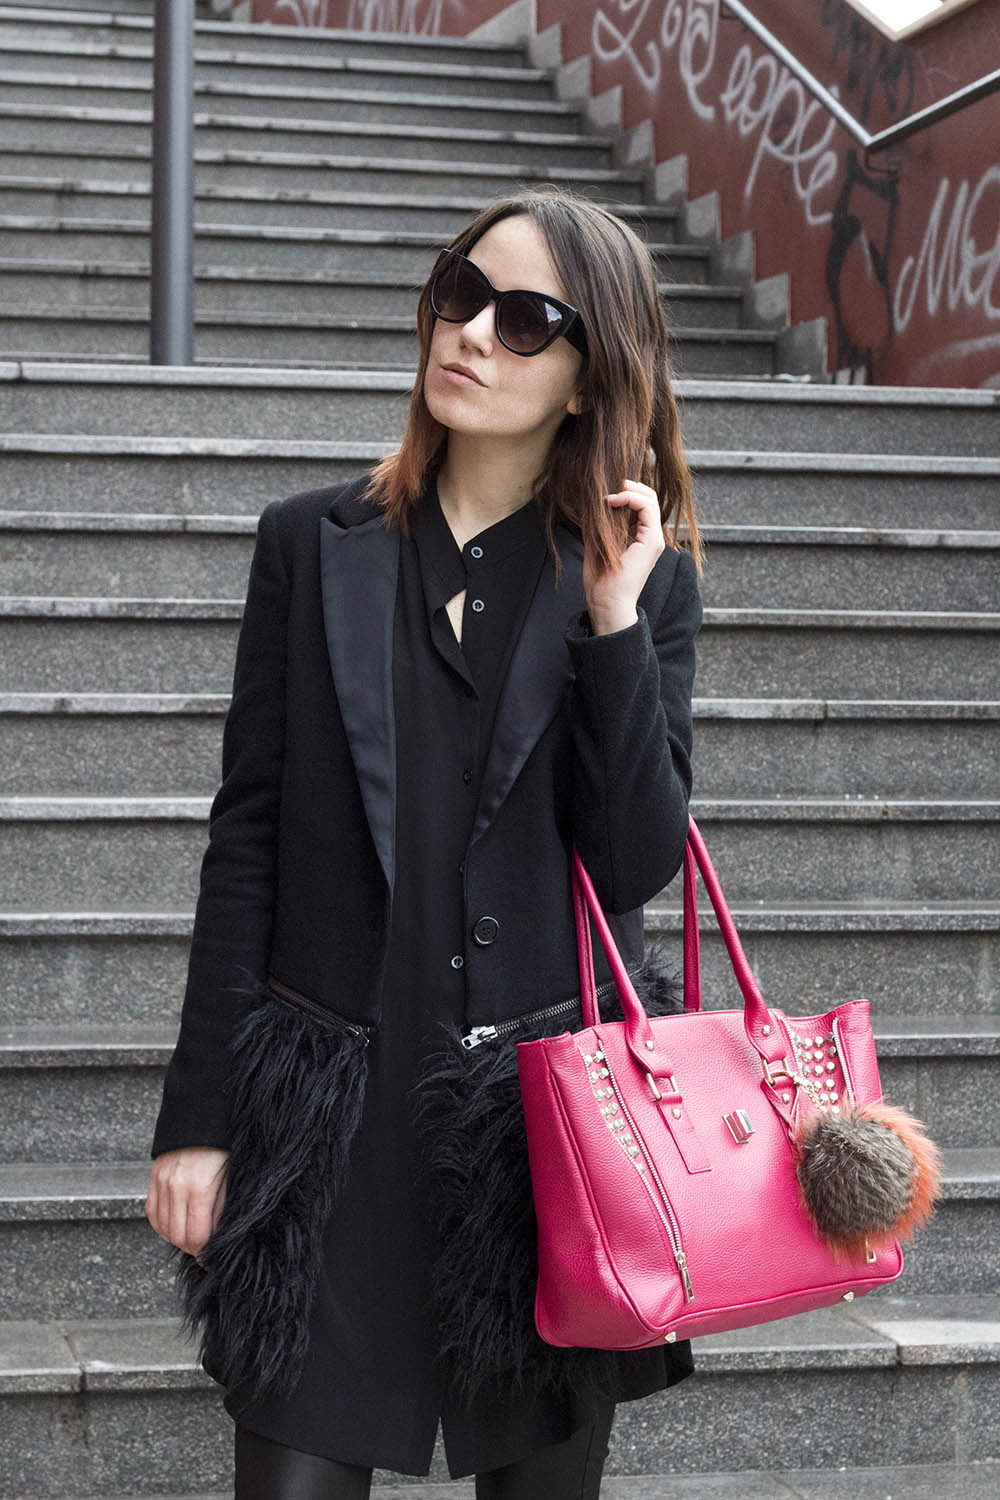 OUTFIT: TOTAL BLACK & PINK ACCENT